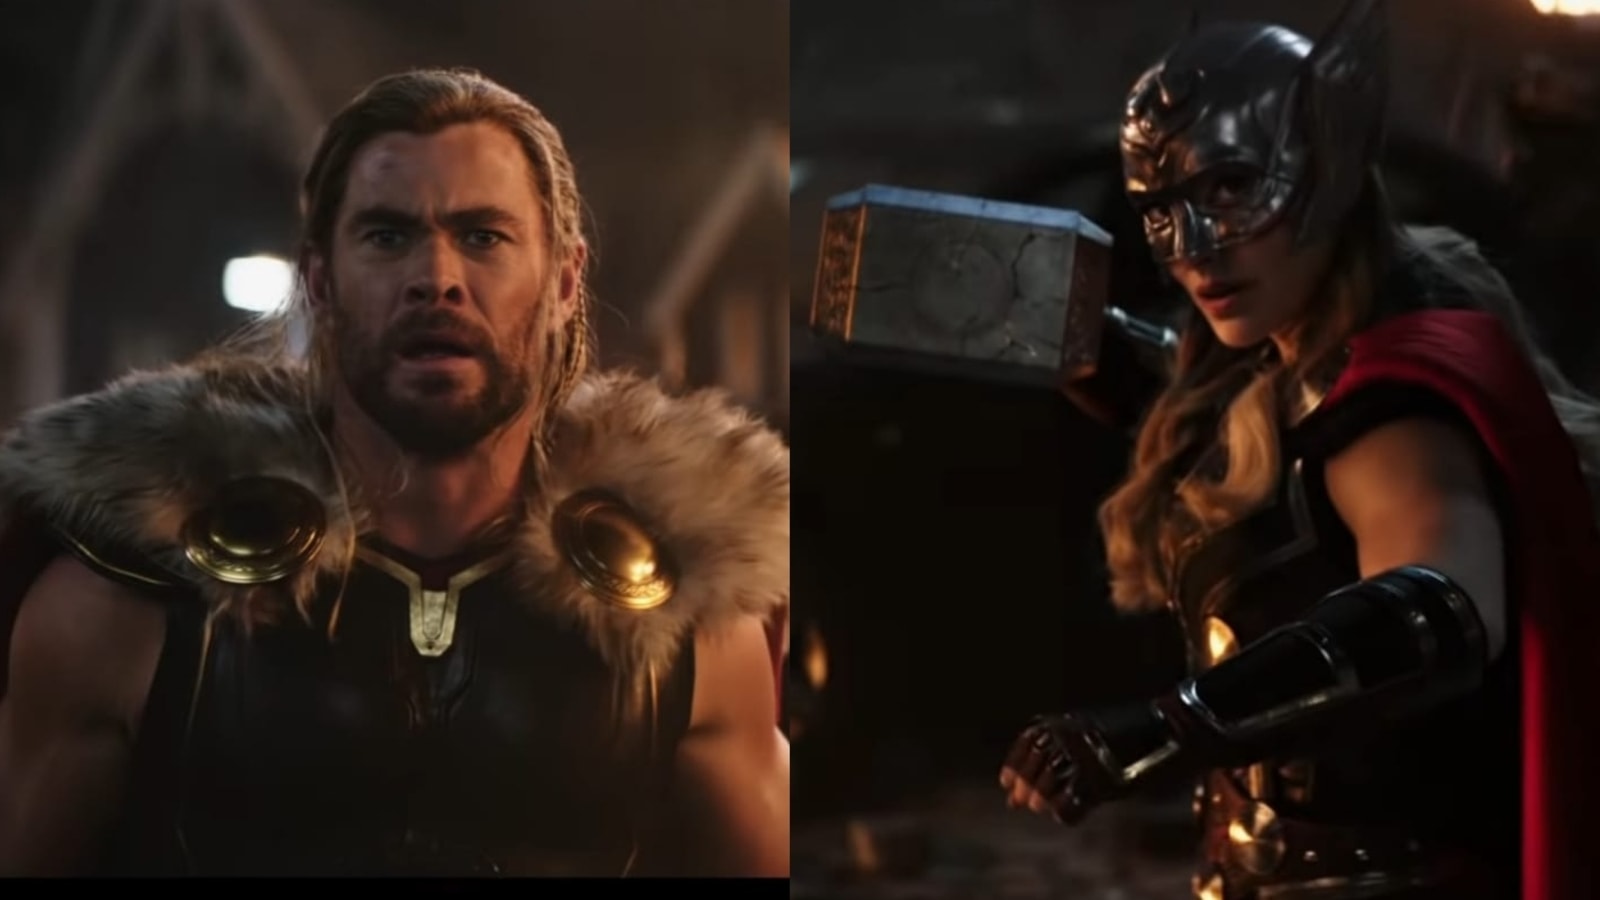 Thor: Love and Thunder Is More Proof Marvel Needs a Phase 4 Goal